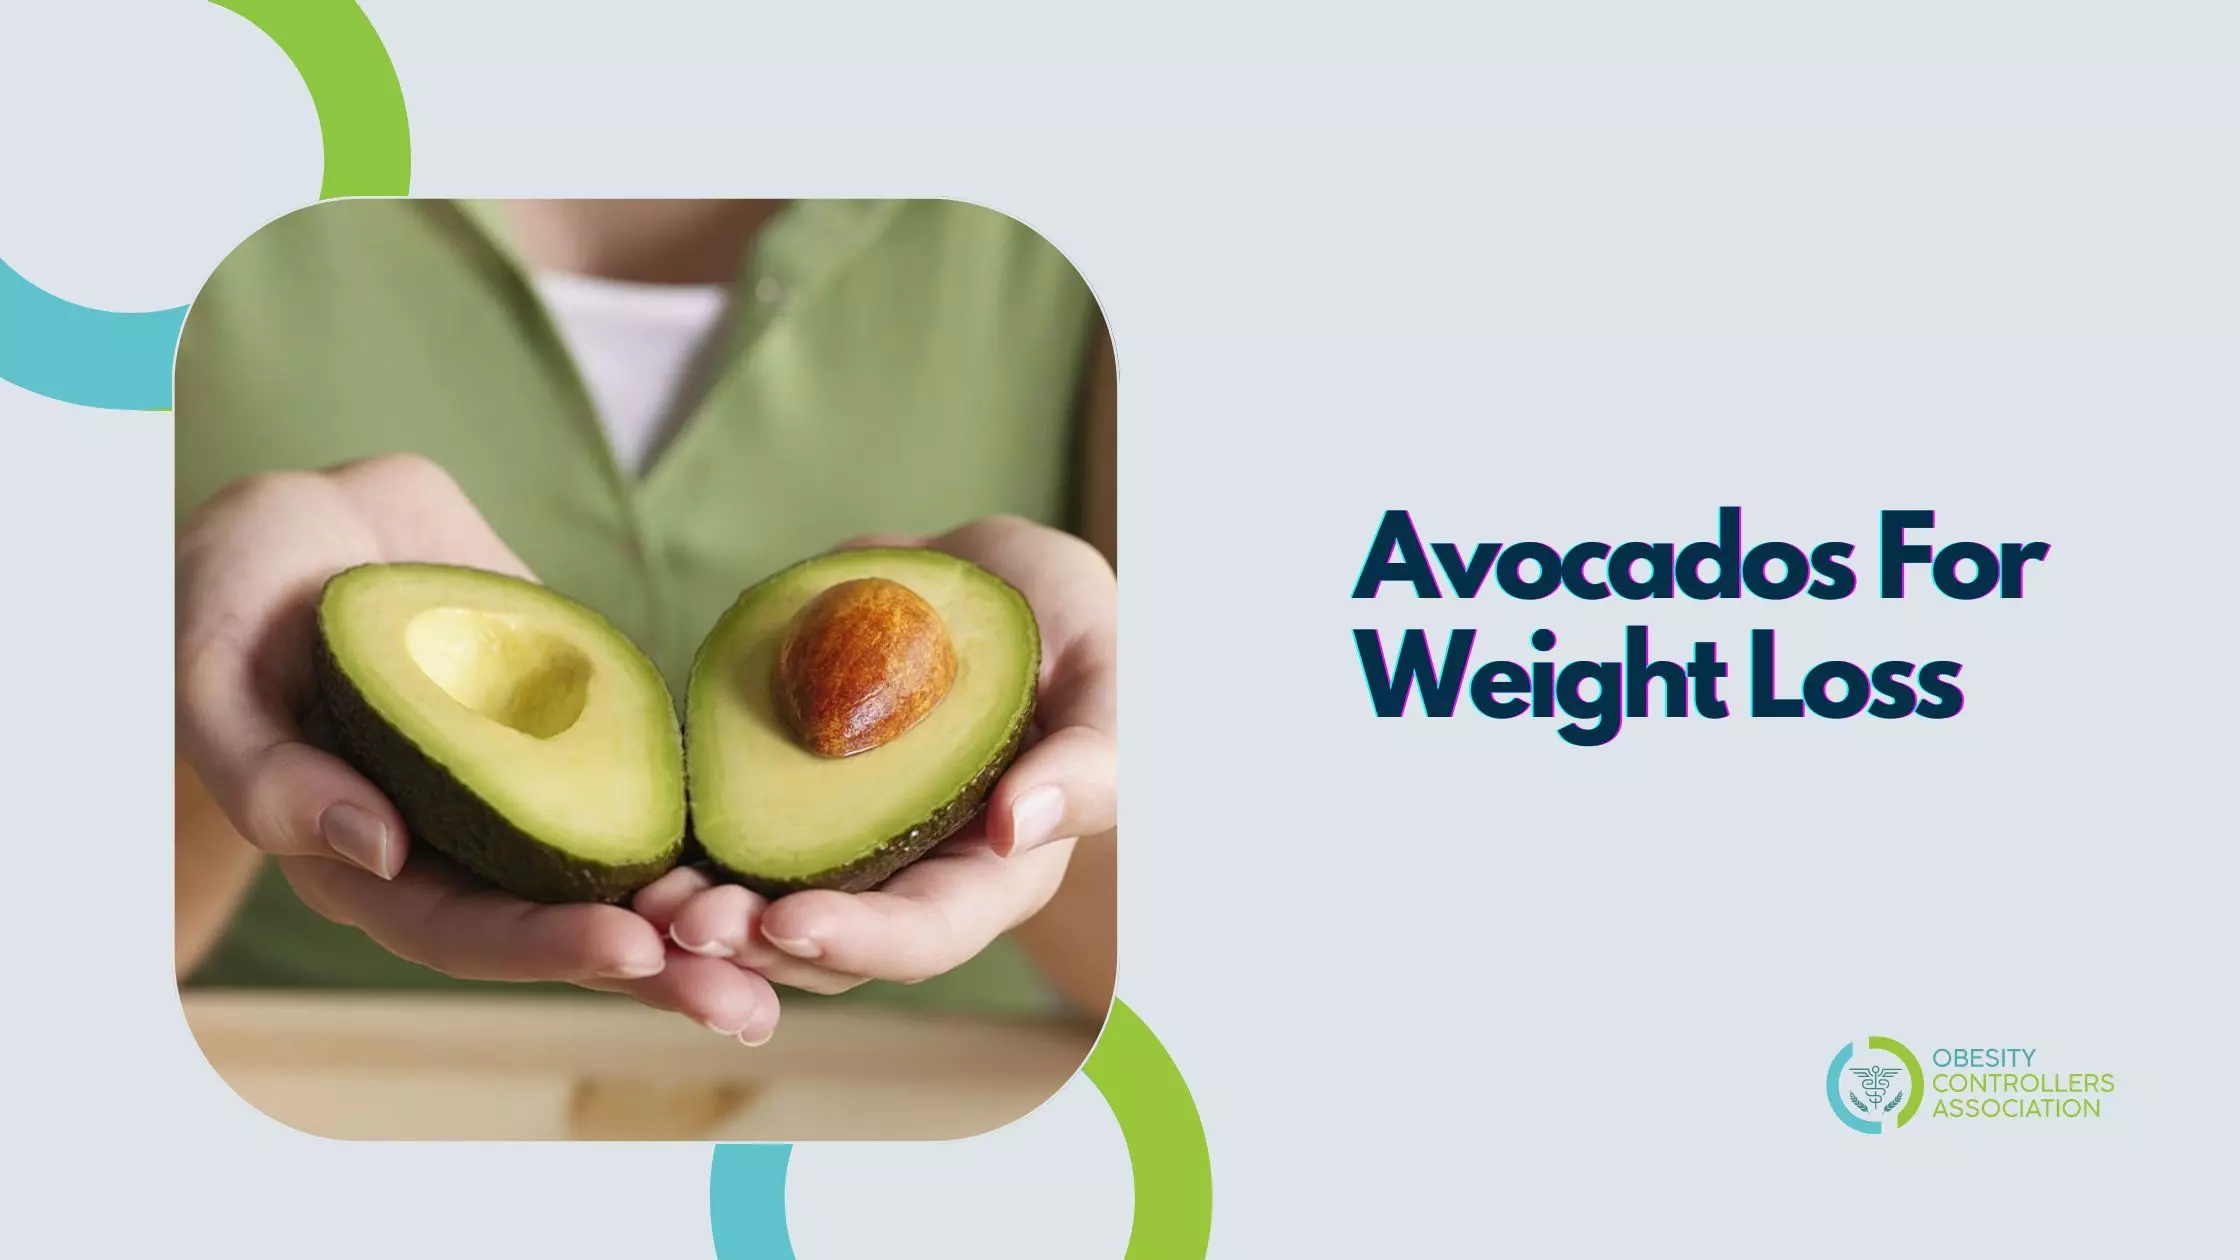 Avocados For Weight Loss